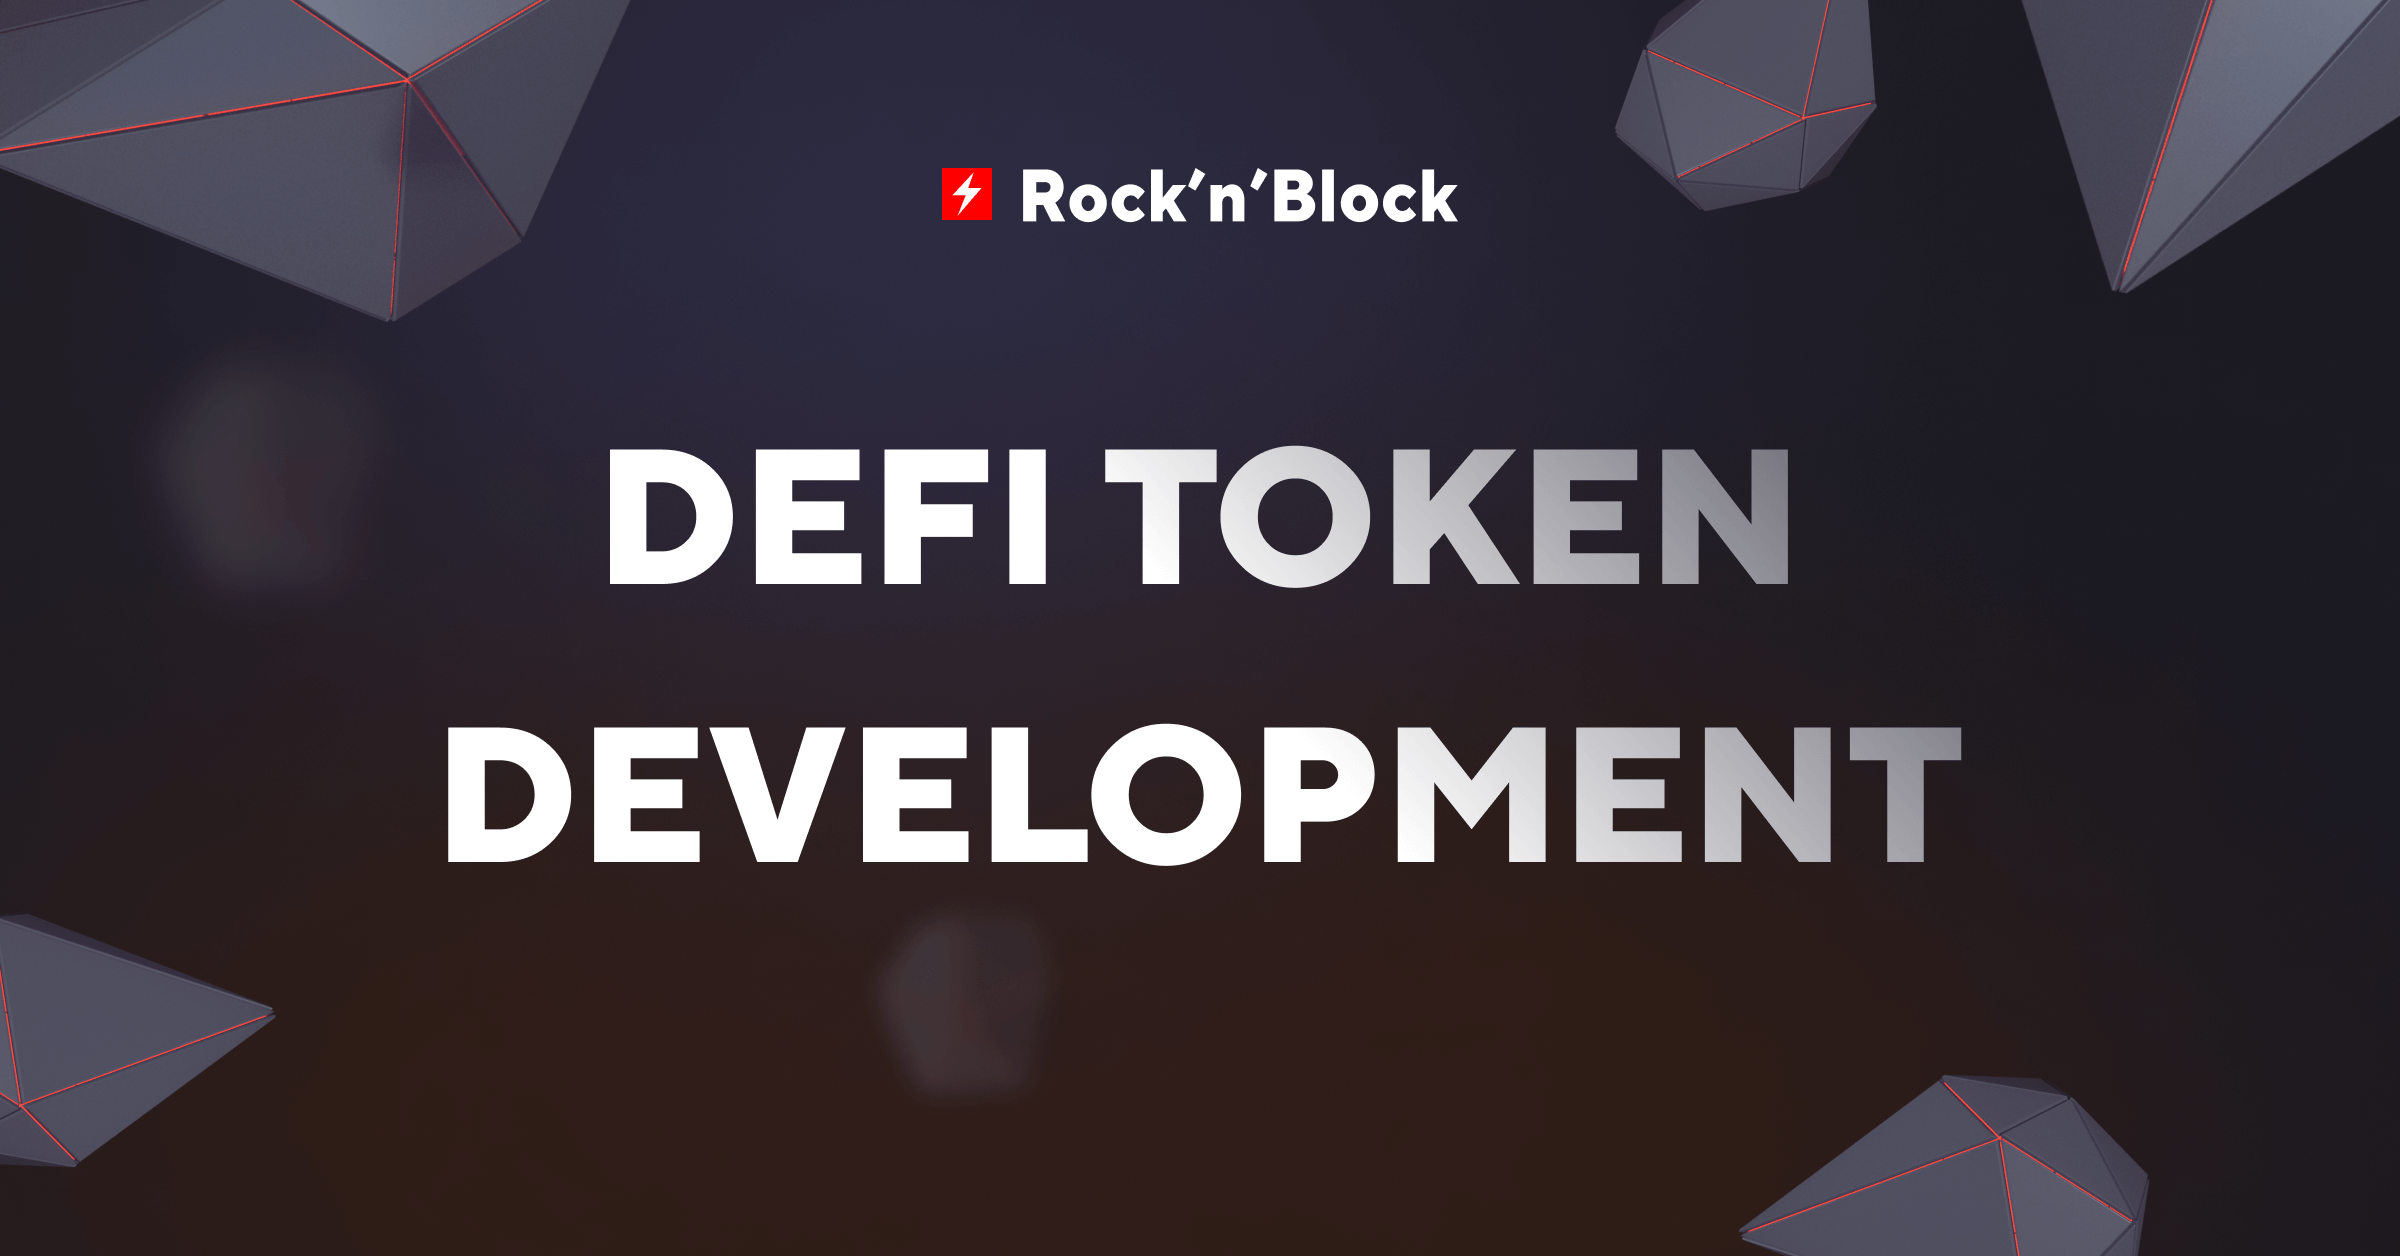 DeFi is one of the fastest-growing segments of cryptocurrency. Yes, crypto has long been distinguished by different segments, like blockchains themselves, stable coins, digital collectibles (NFT, non-fungible tokens), prediction markets, decentralized autonomous organizations (DAOs), and many more. Rock'n'Block explains everything about DeFi token development